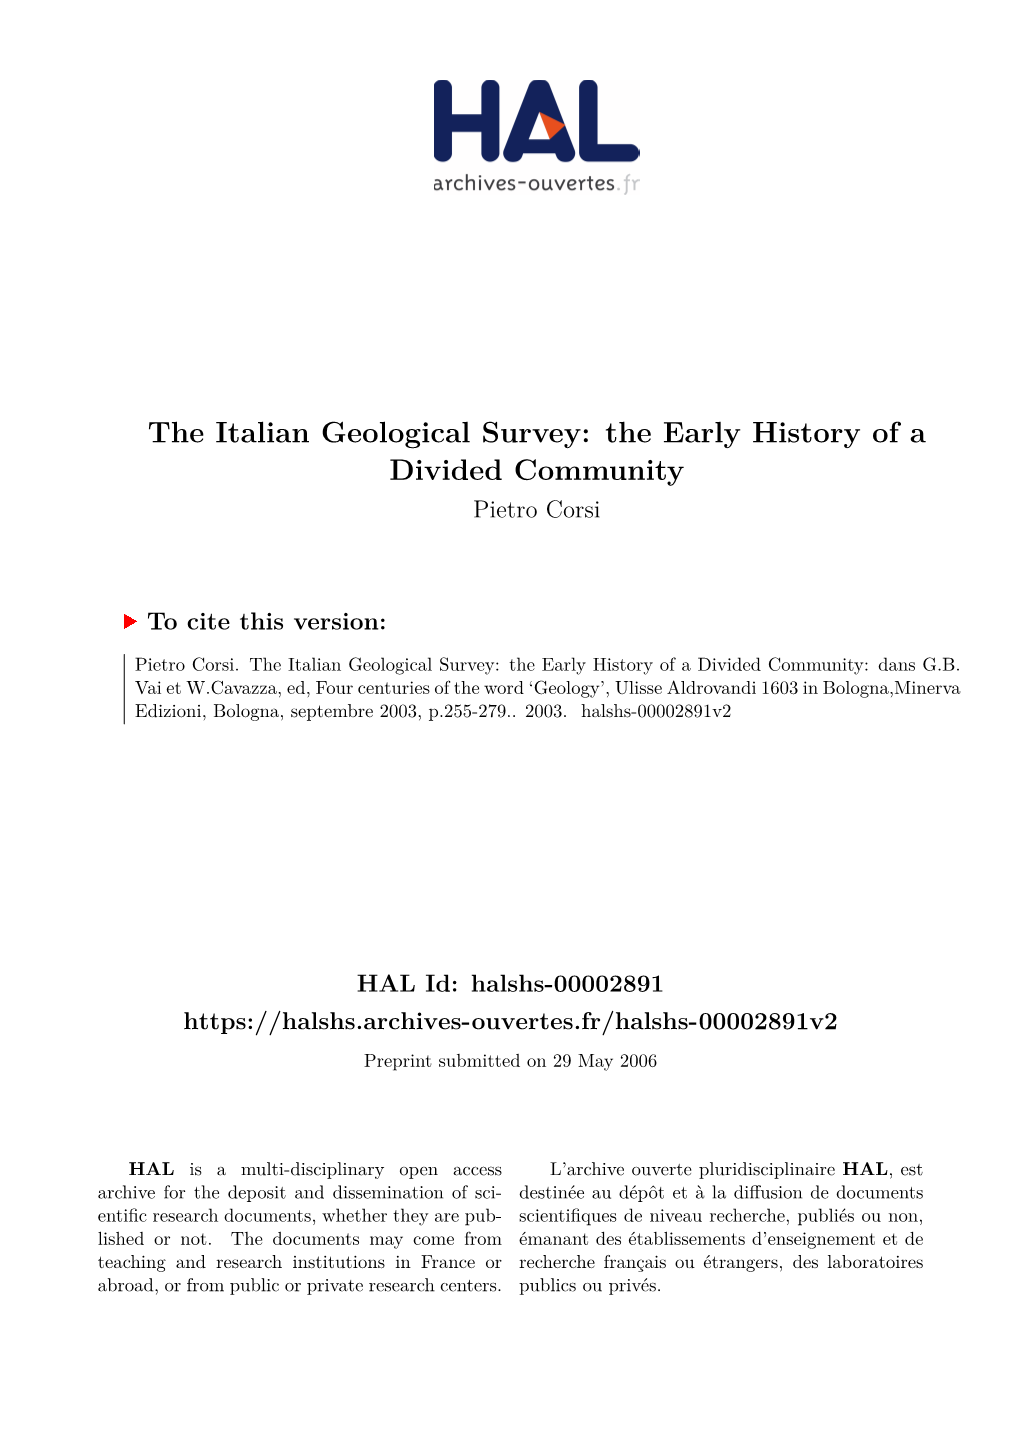 The Italian Geological Survey: the Early History of a Divided Community Pietro Corsi